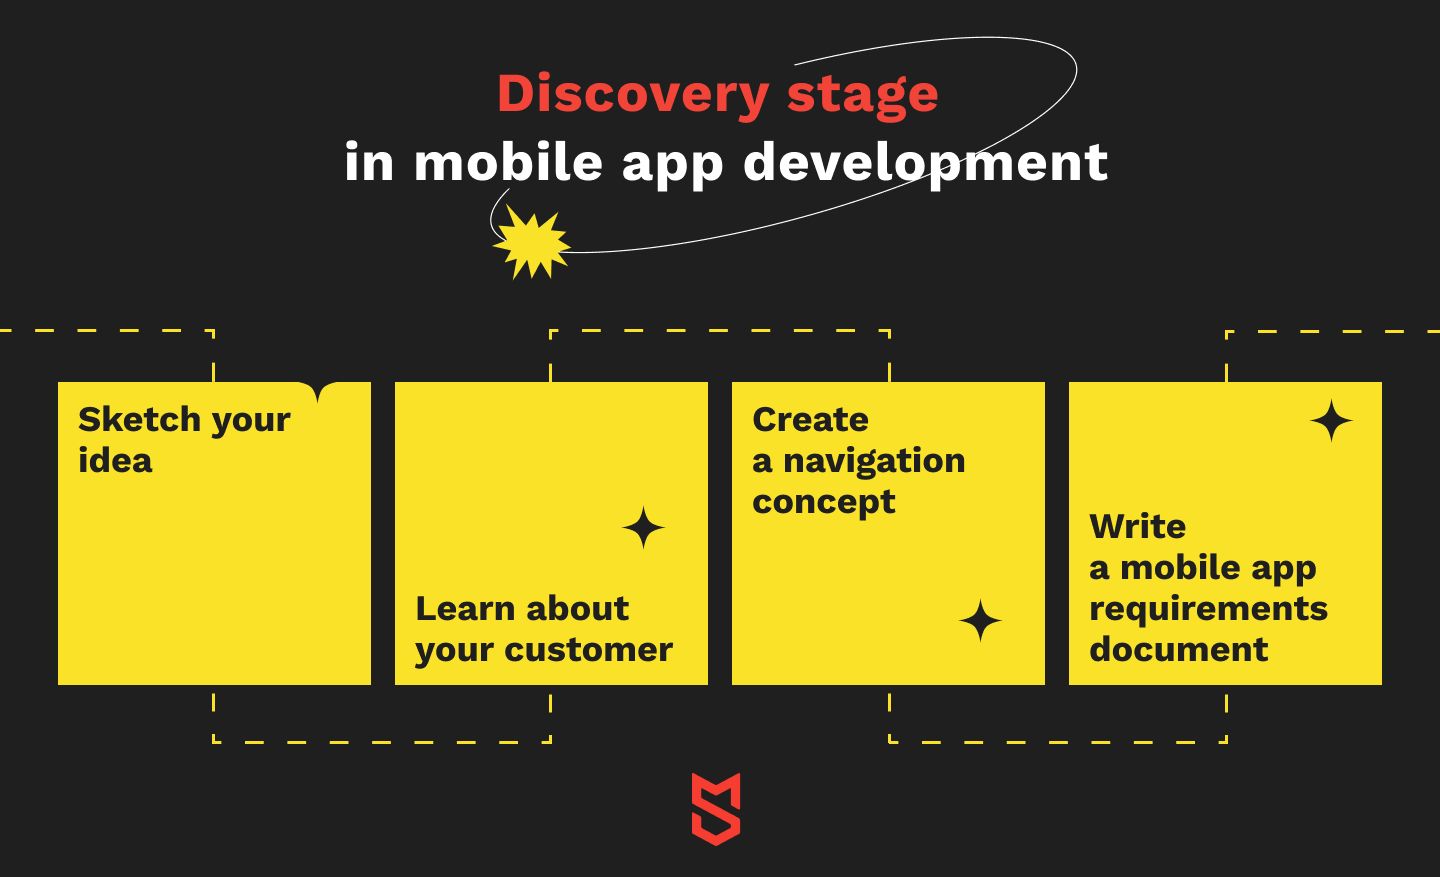 Discovery stage in mobile app development